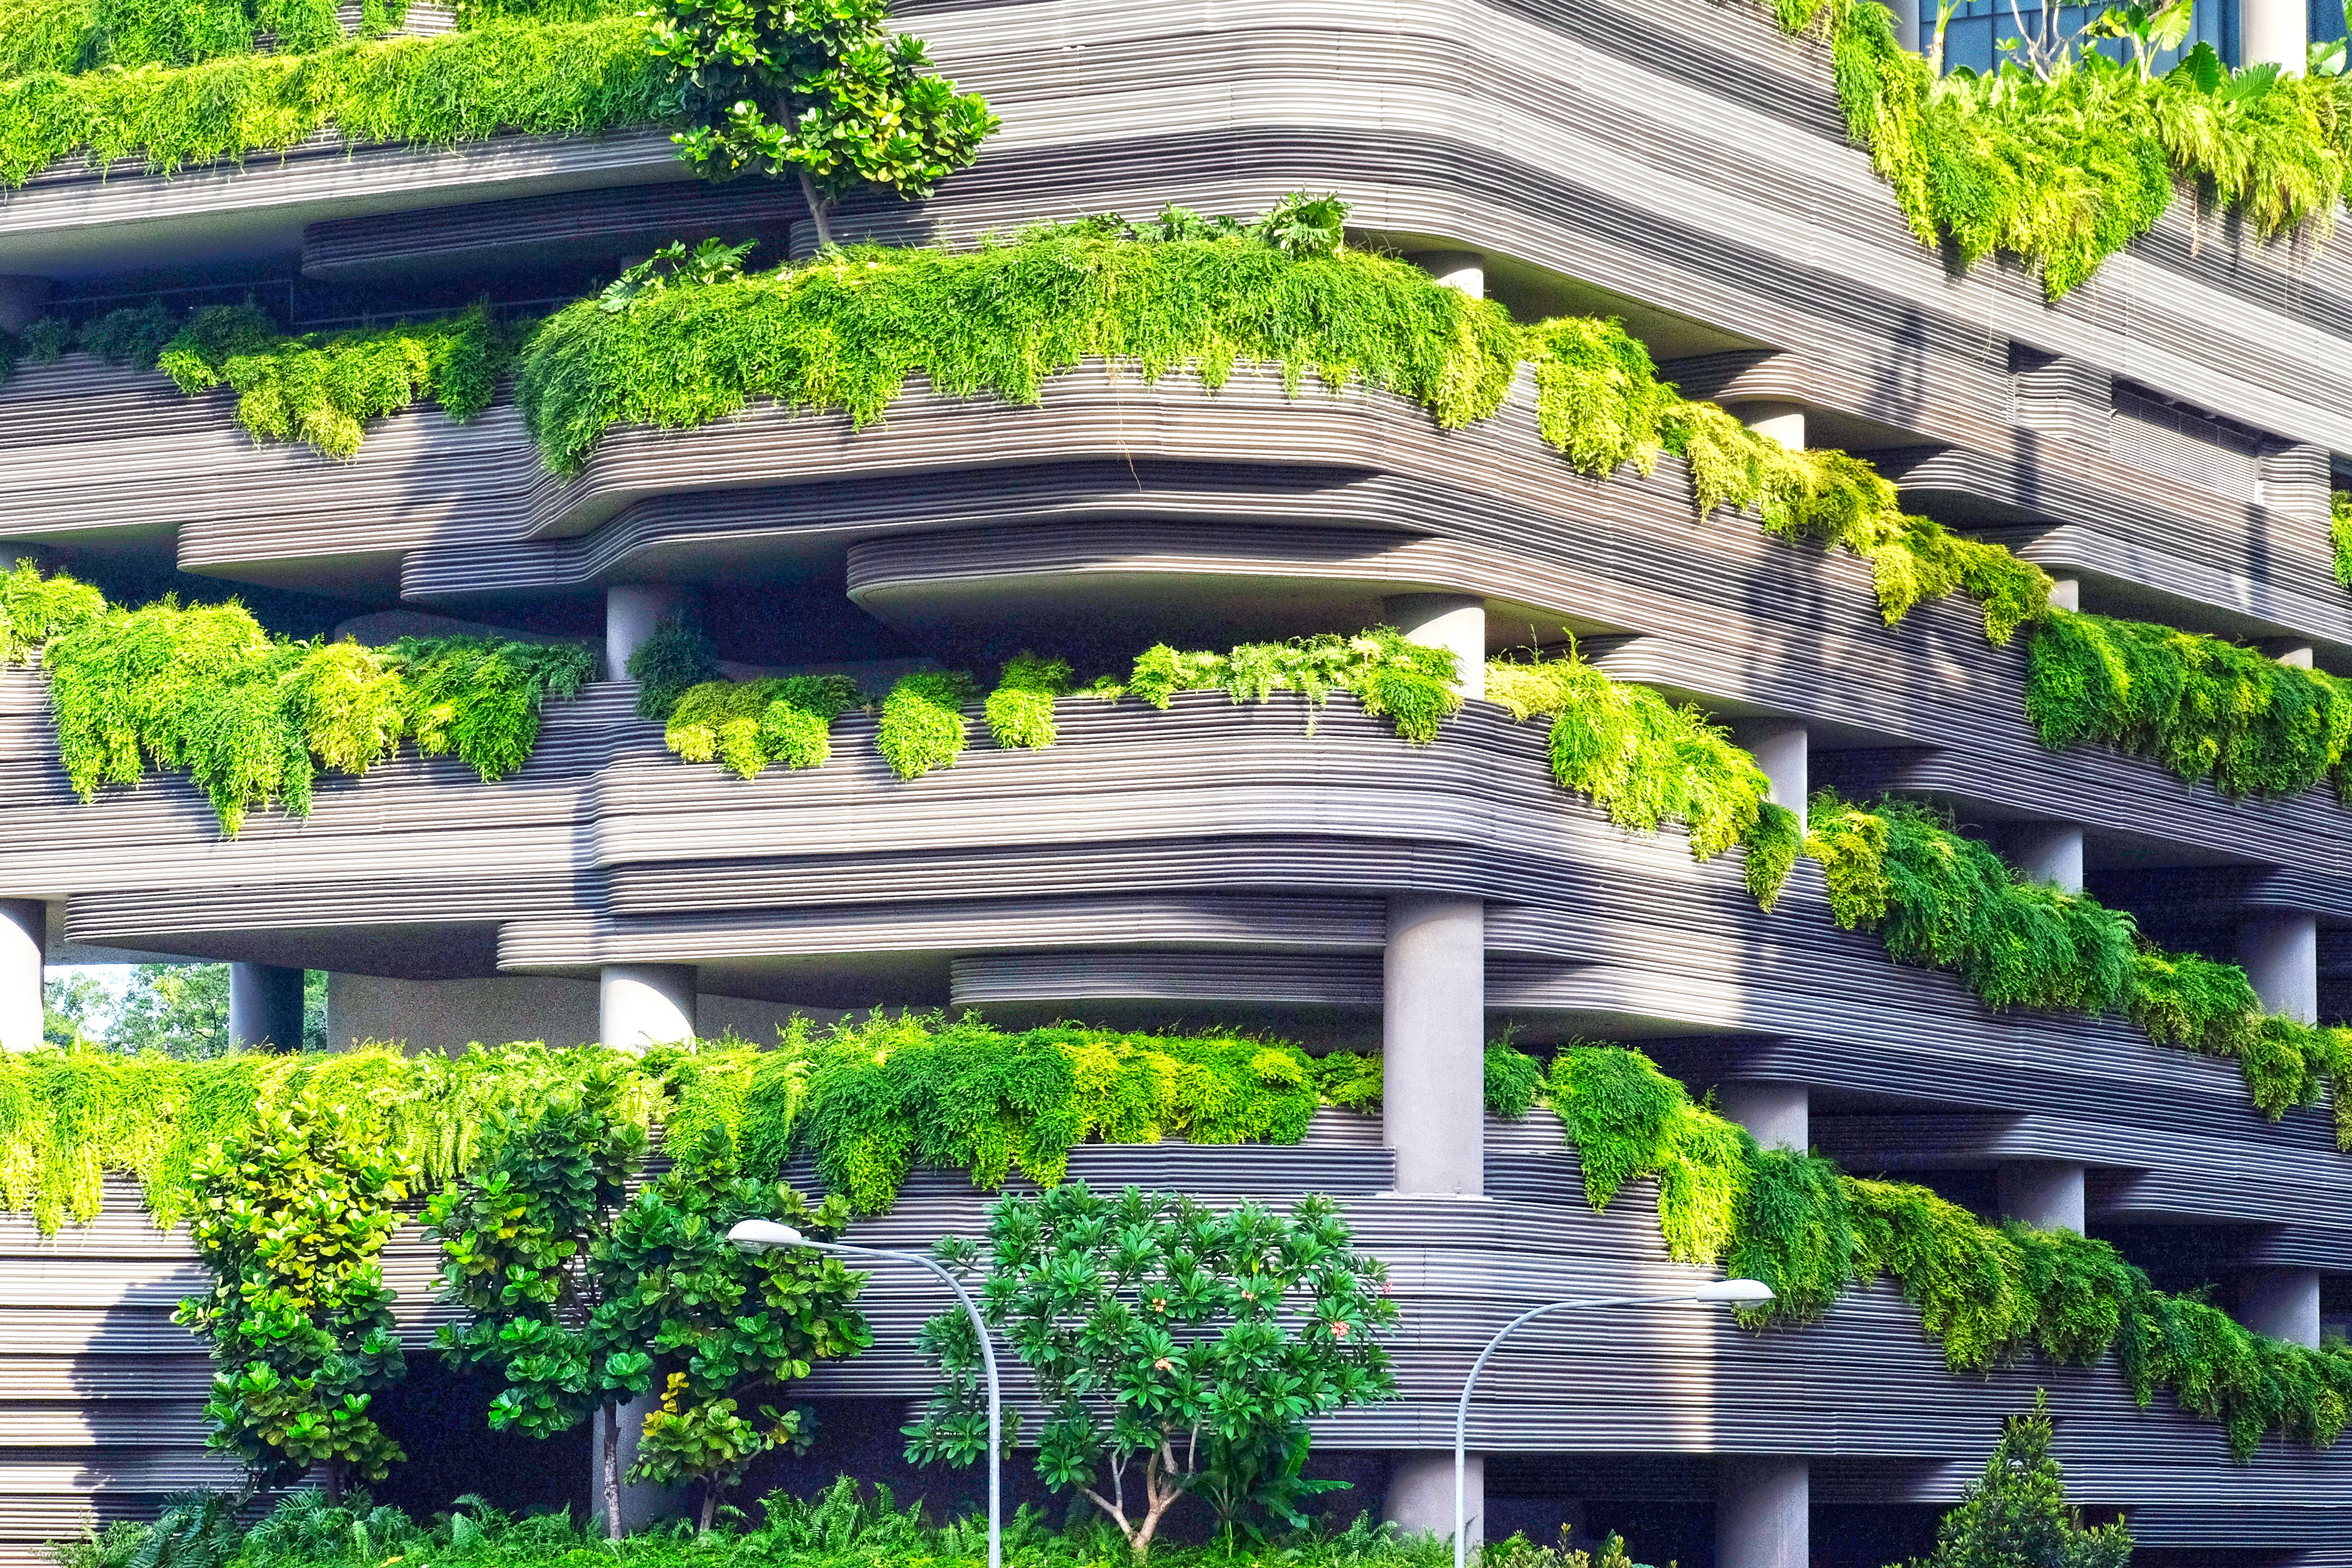 A concrete parking structure with bright green, leafy plants spilling out at every level.